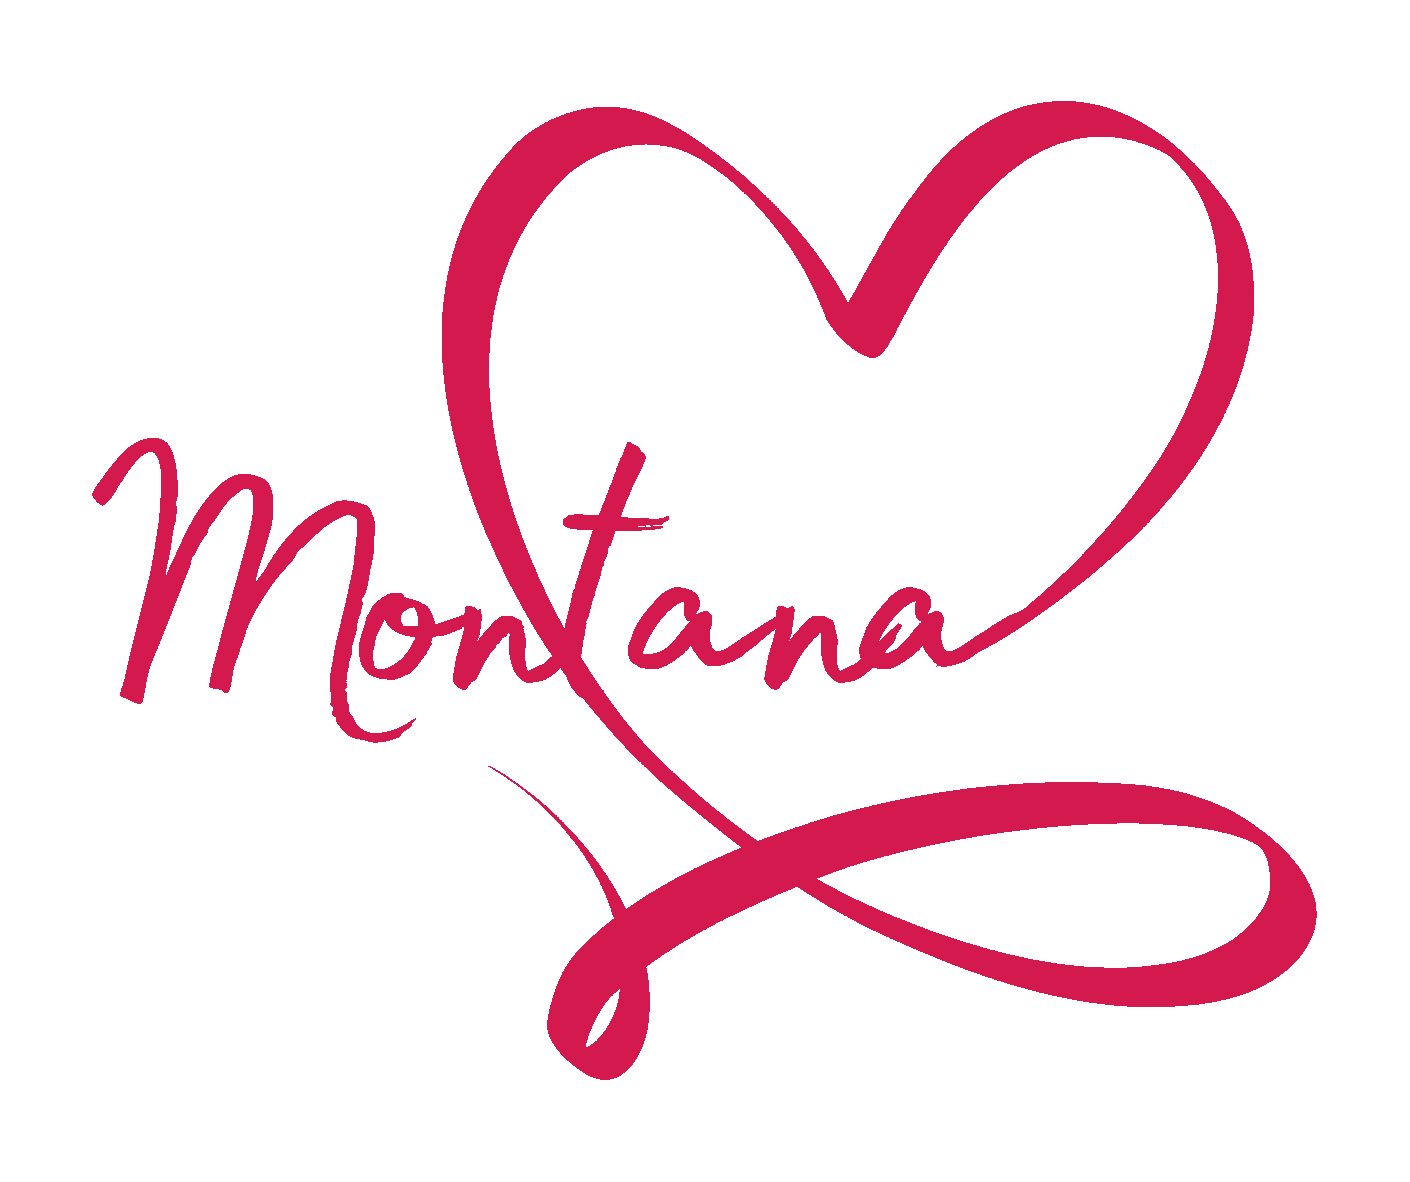 A Montana Love sticker with vibrant colors and a heart symbol, ideal for decorating personal items.